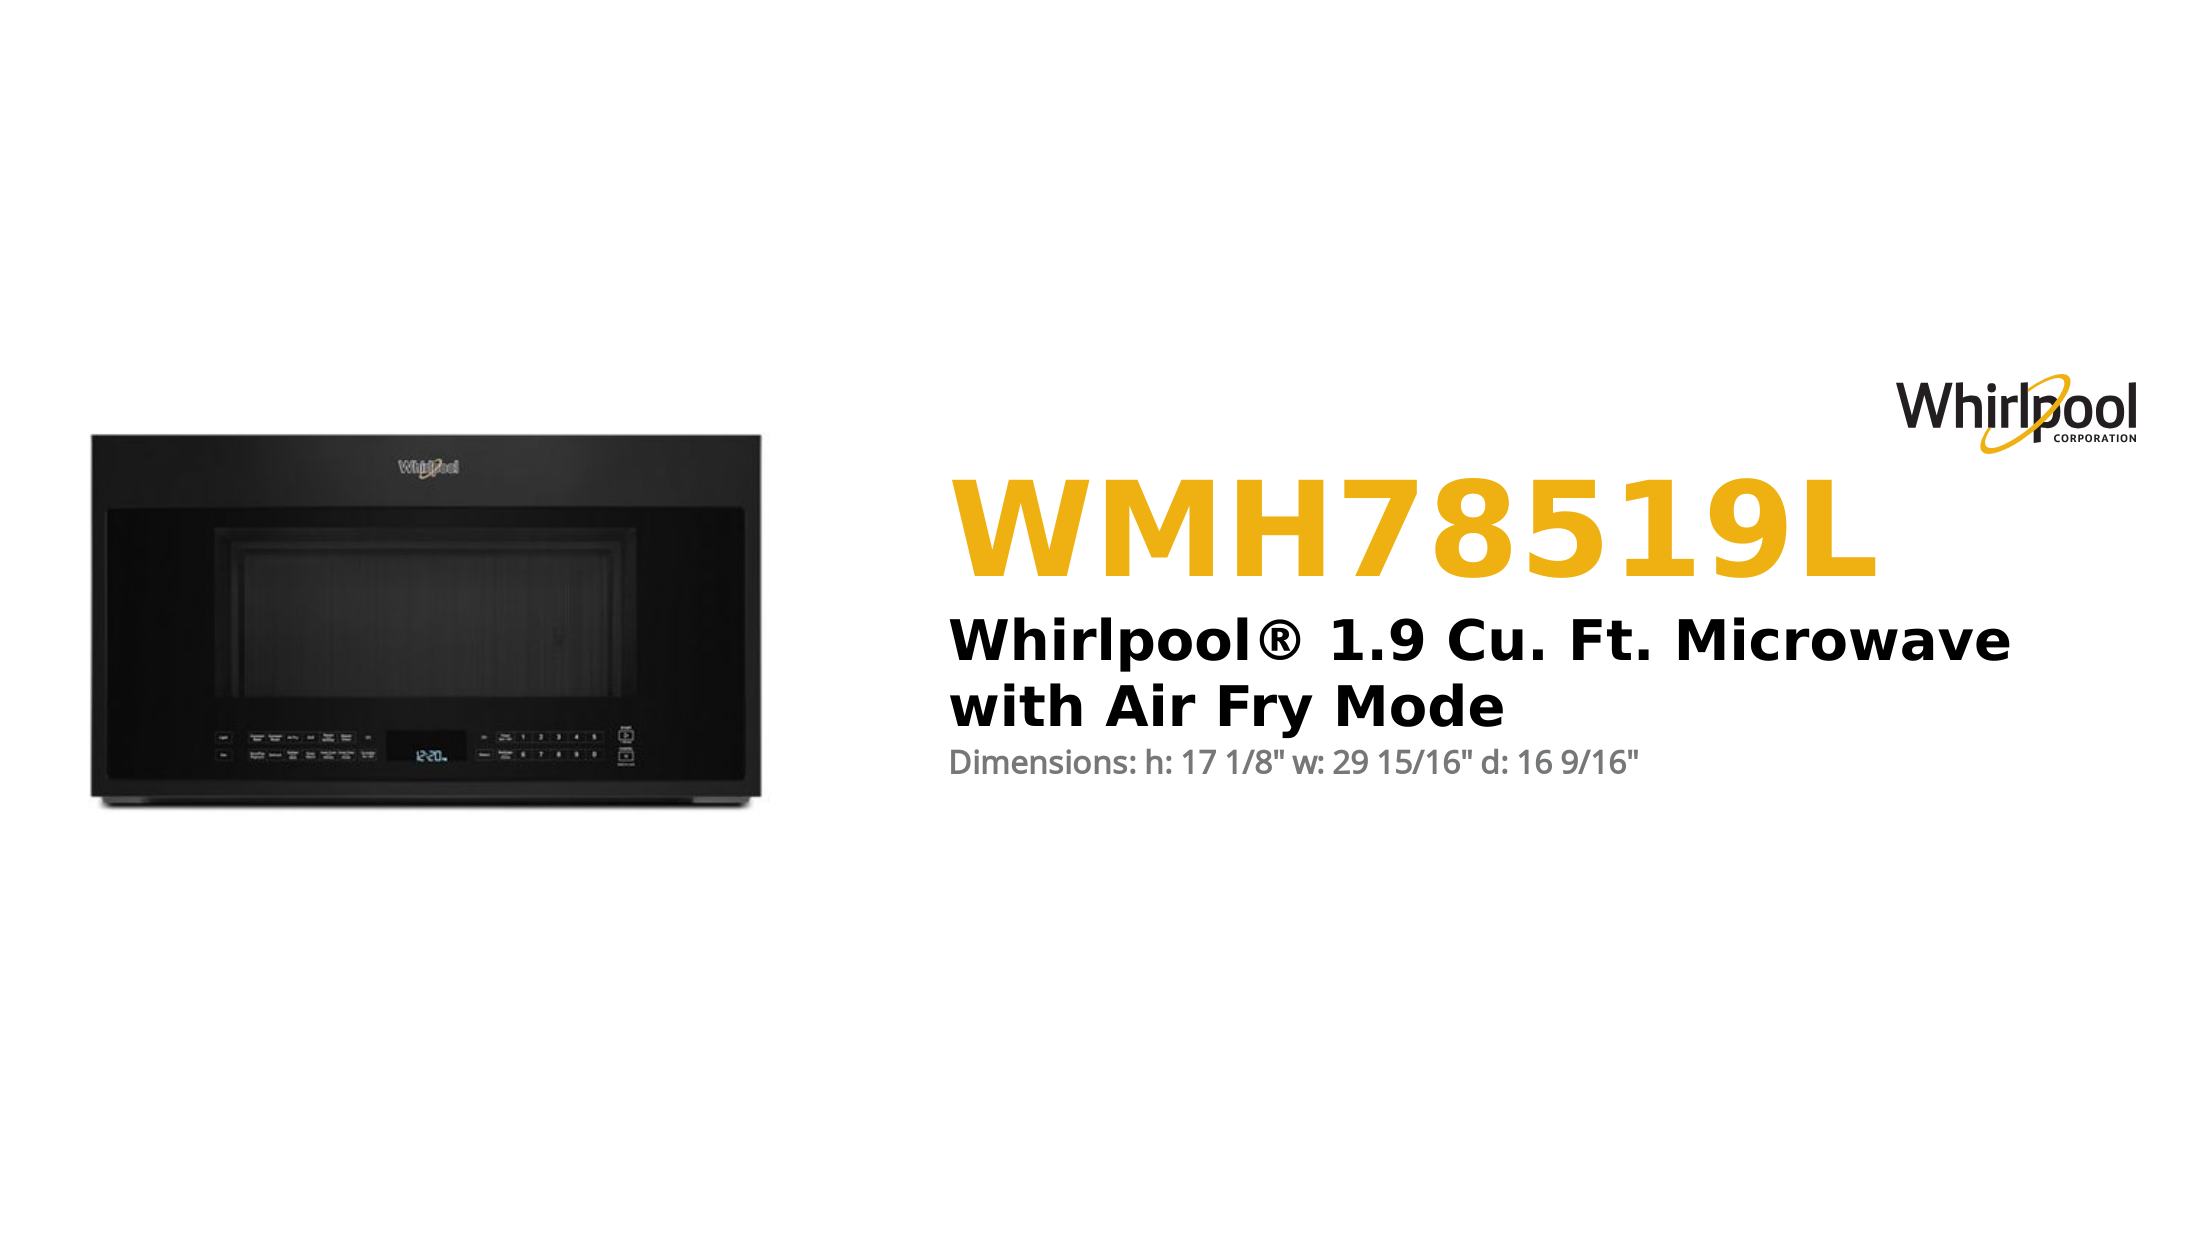 Whirlpool® 1.9 Cu. Ft. Microwave with Air Fry Mode